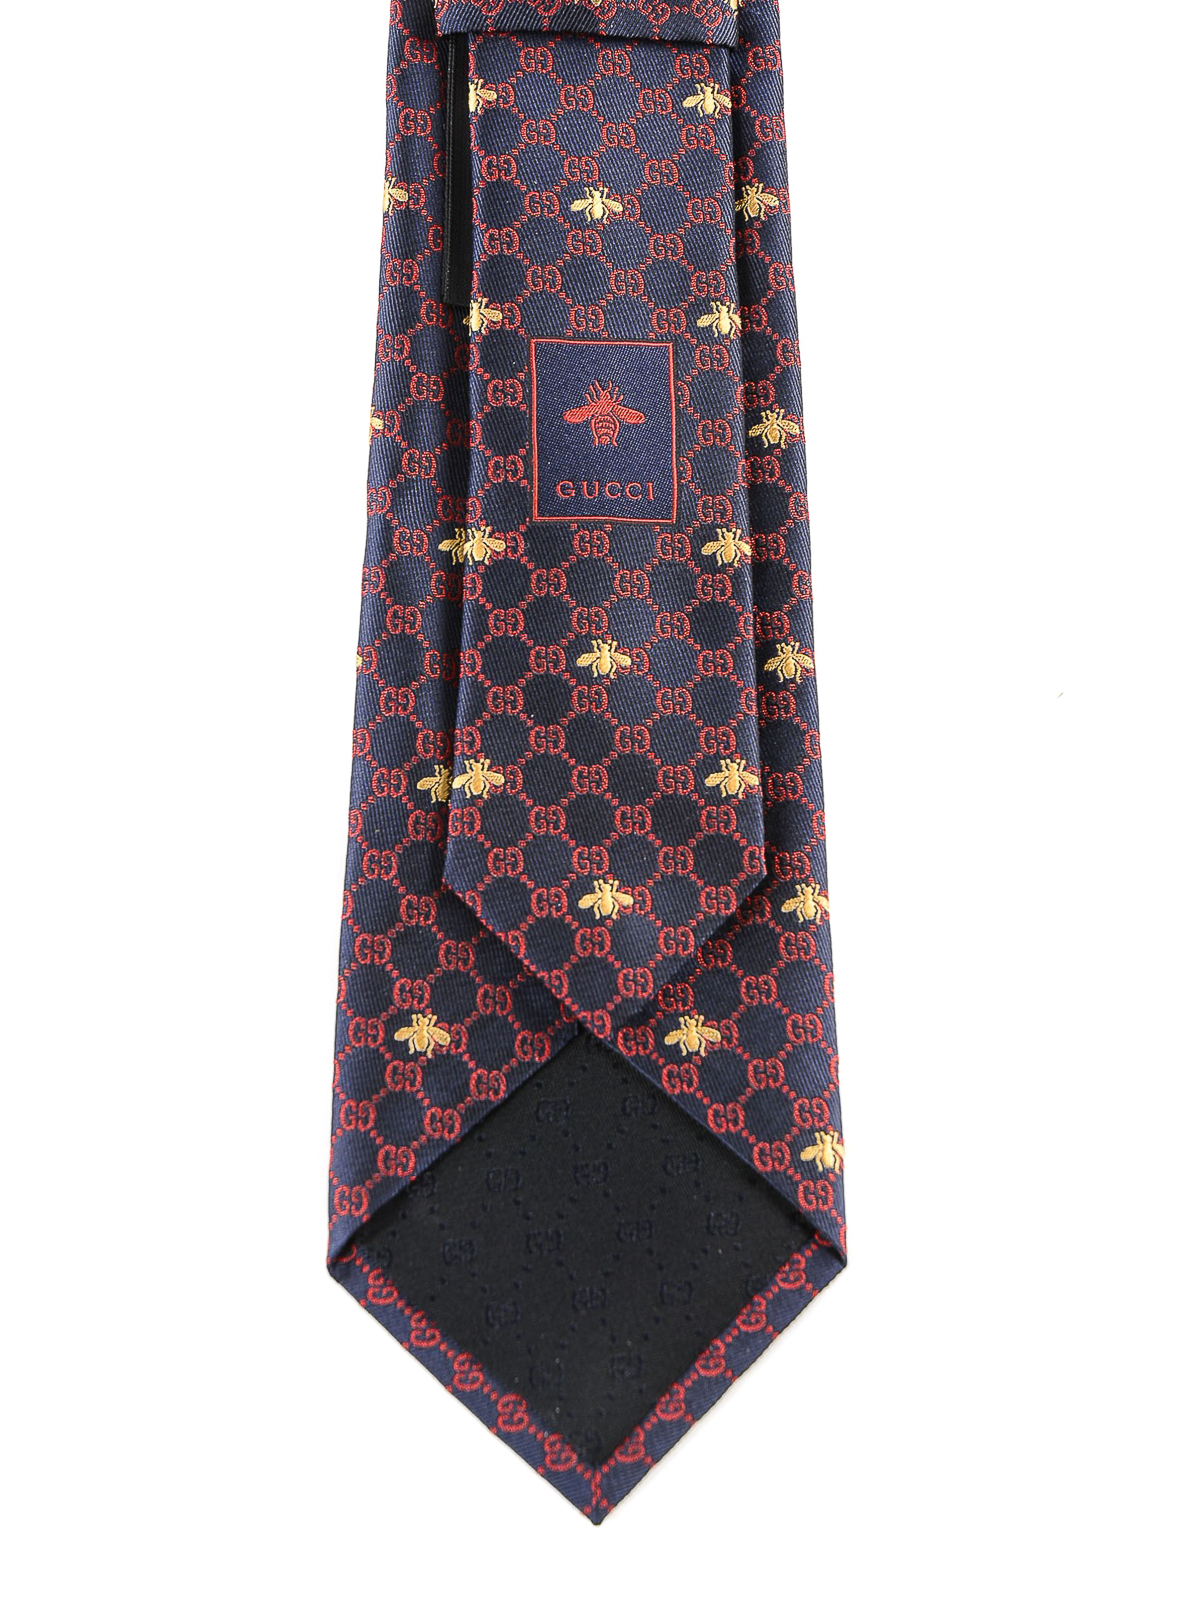 Traktat historie frygt Ties & bow ties Gucci - Interlocking G and gold-tone bees silk tie -  5450784E0024174